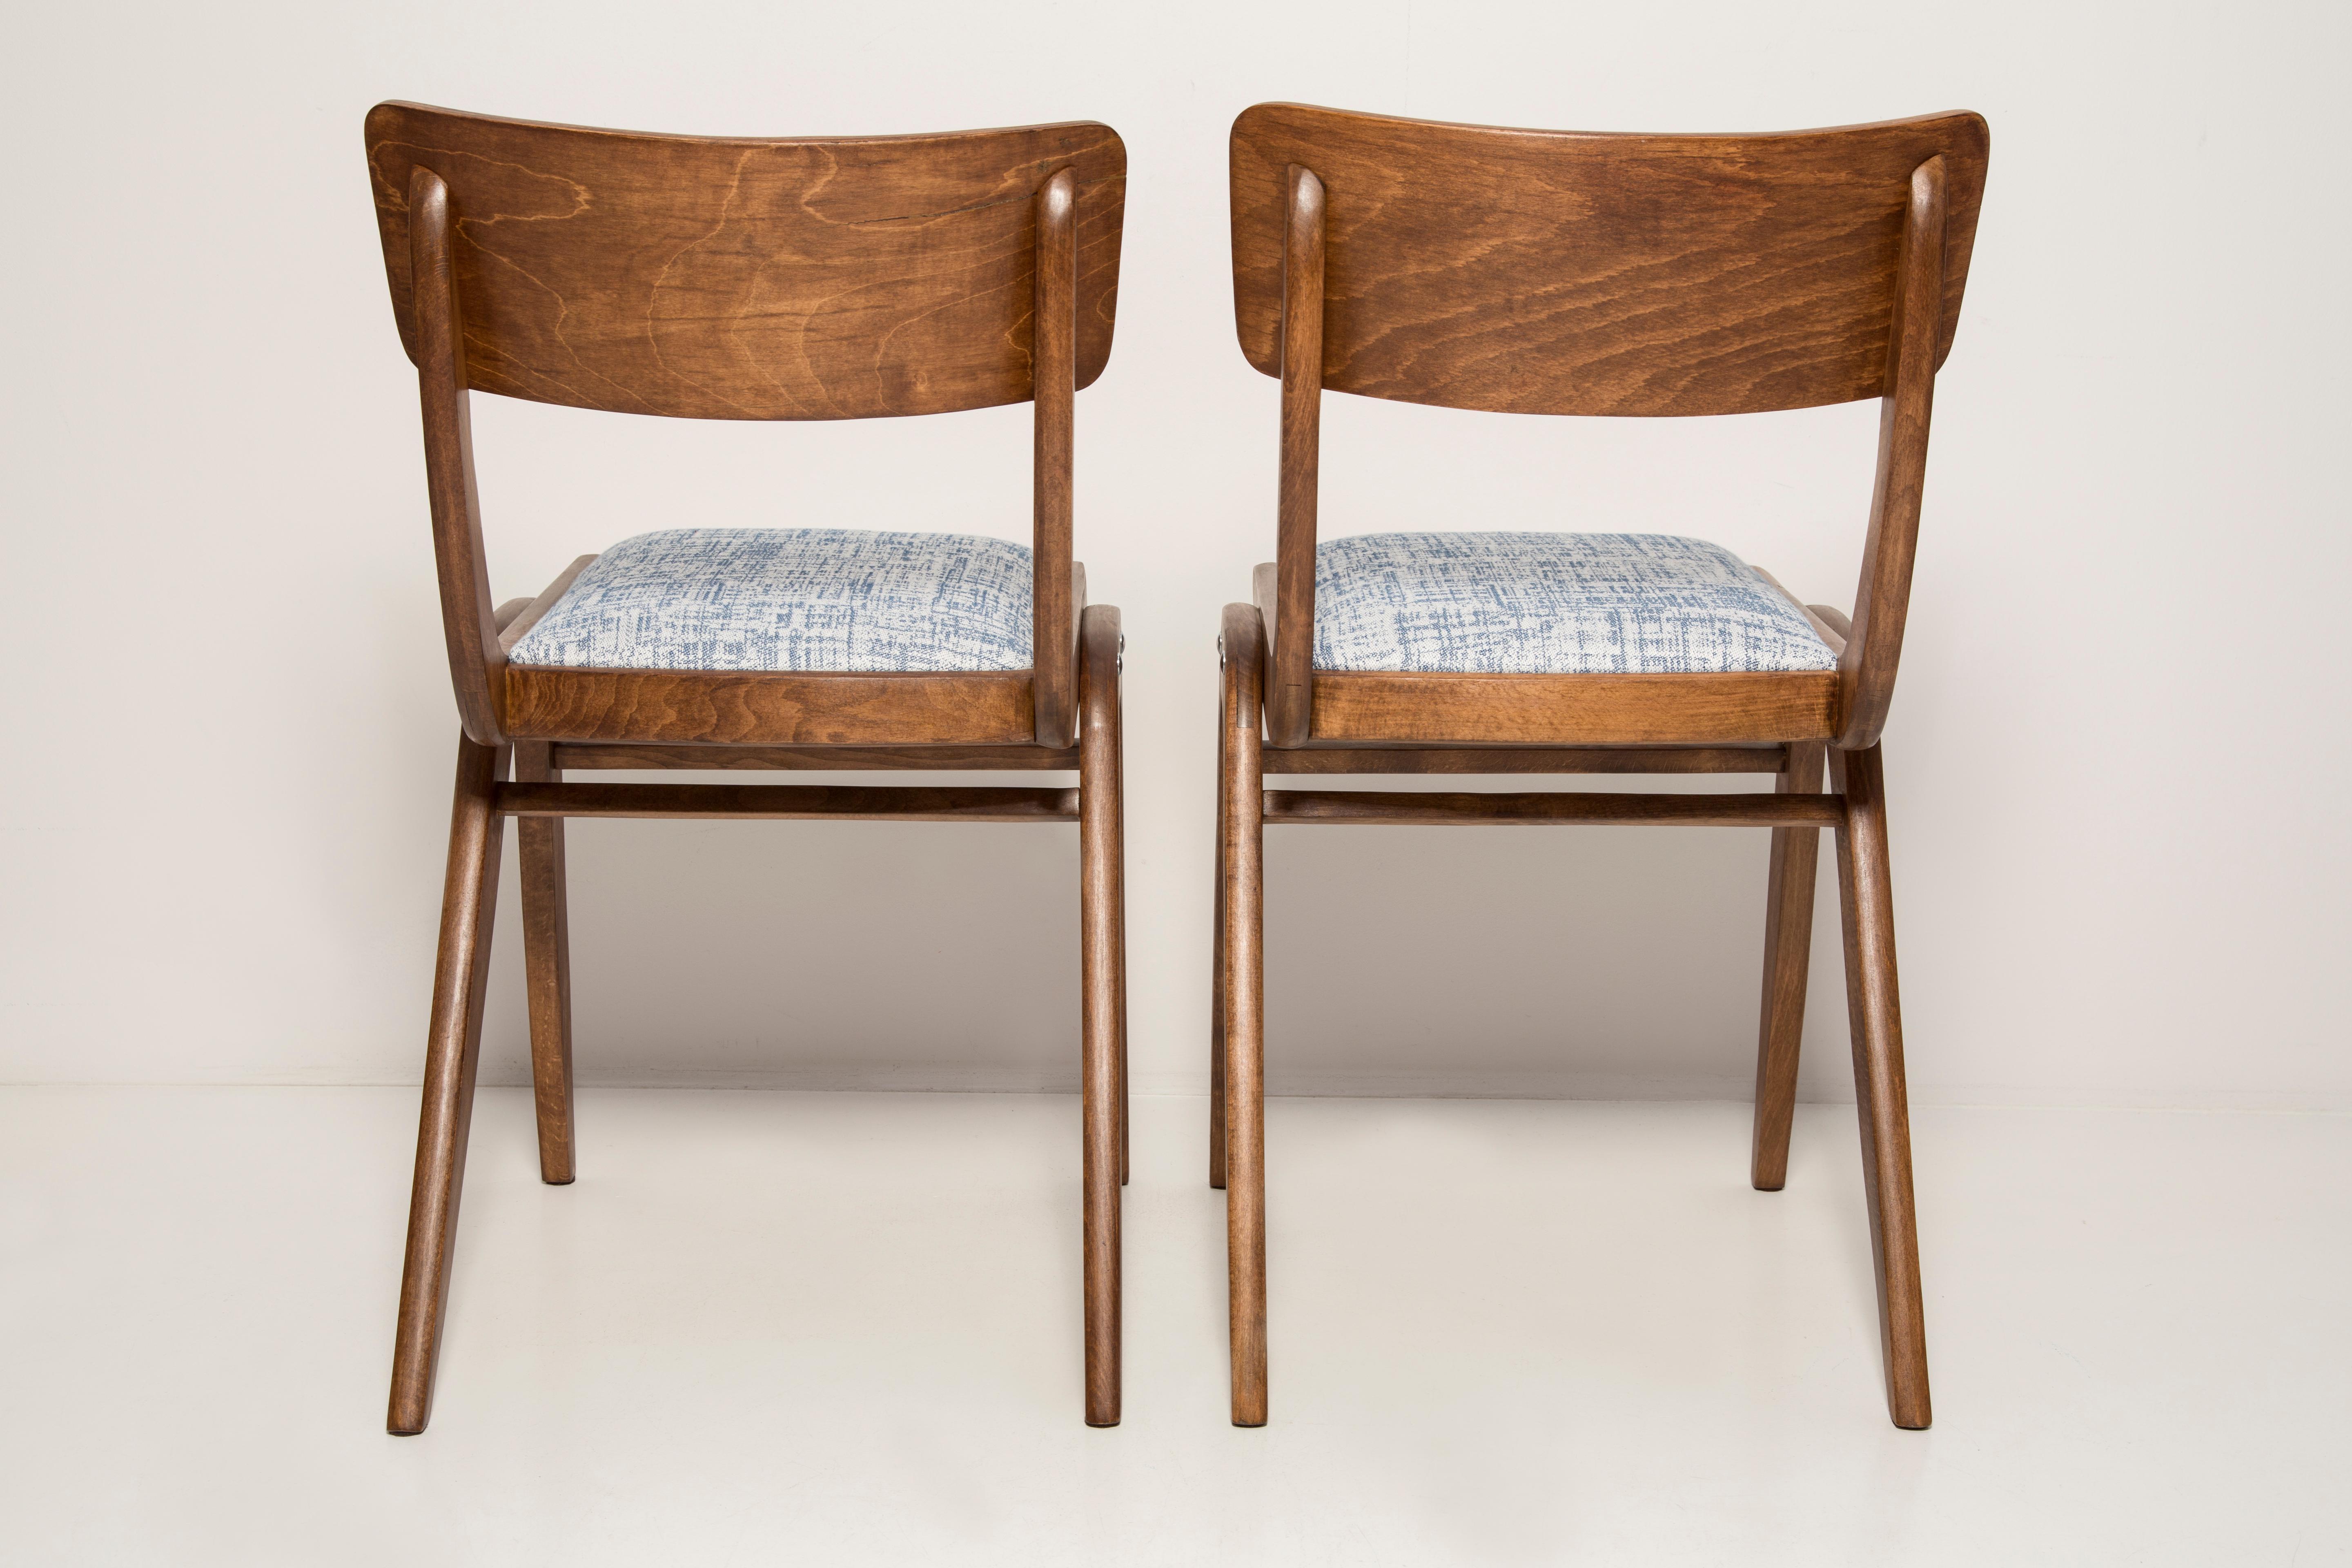 Pair of Midcentury White Blue Linen Boomerang Chairs, Dark Wood, Poland, 1960s For Sale 2